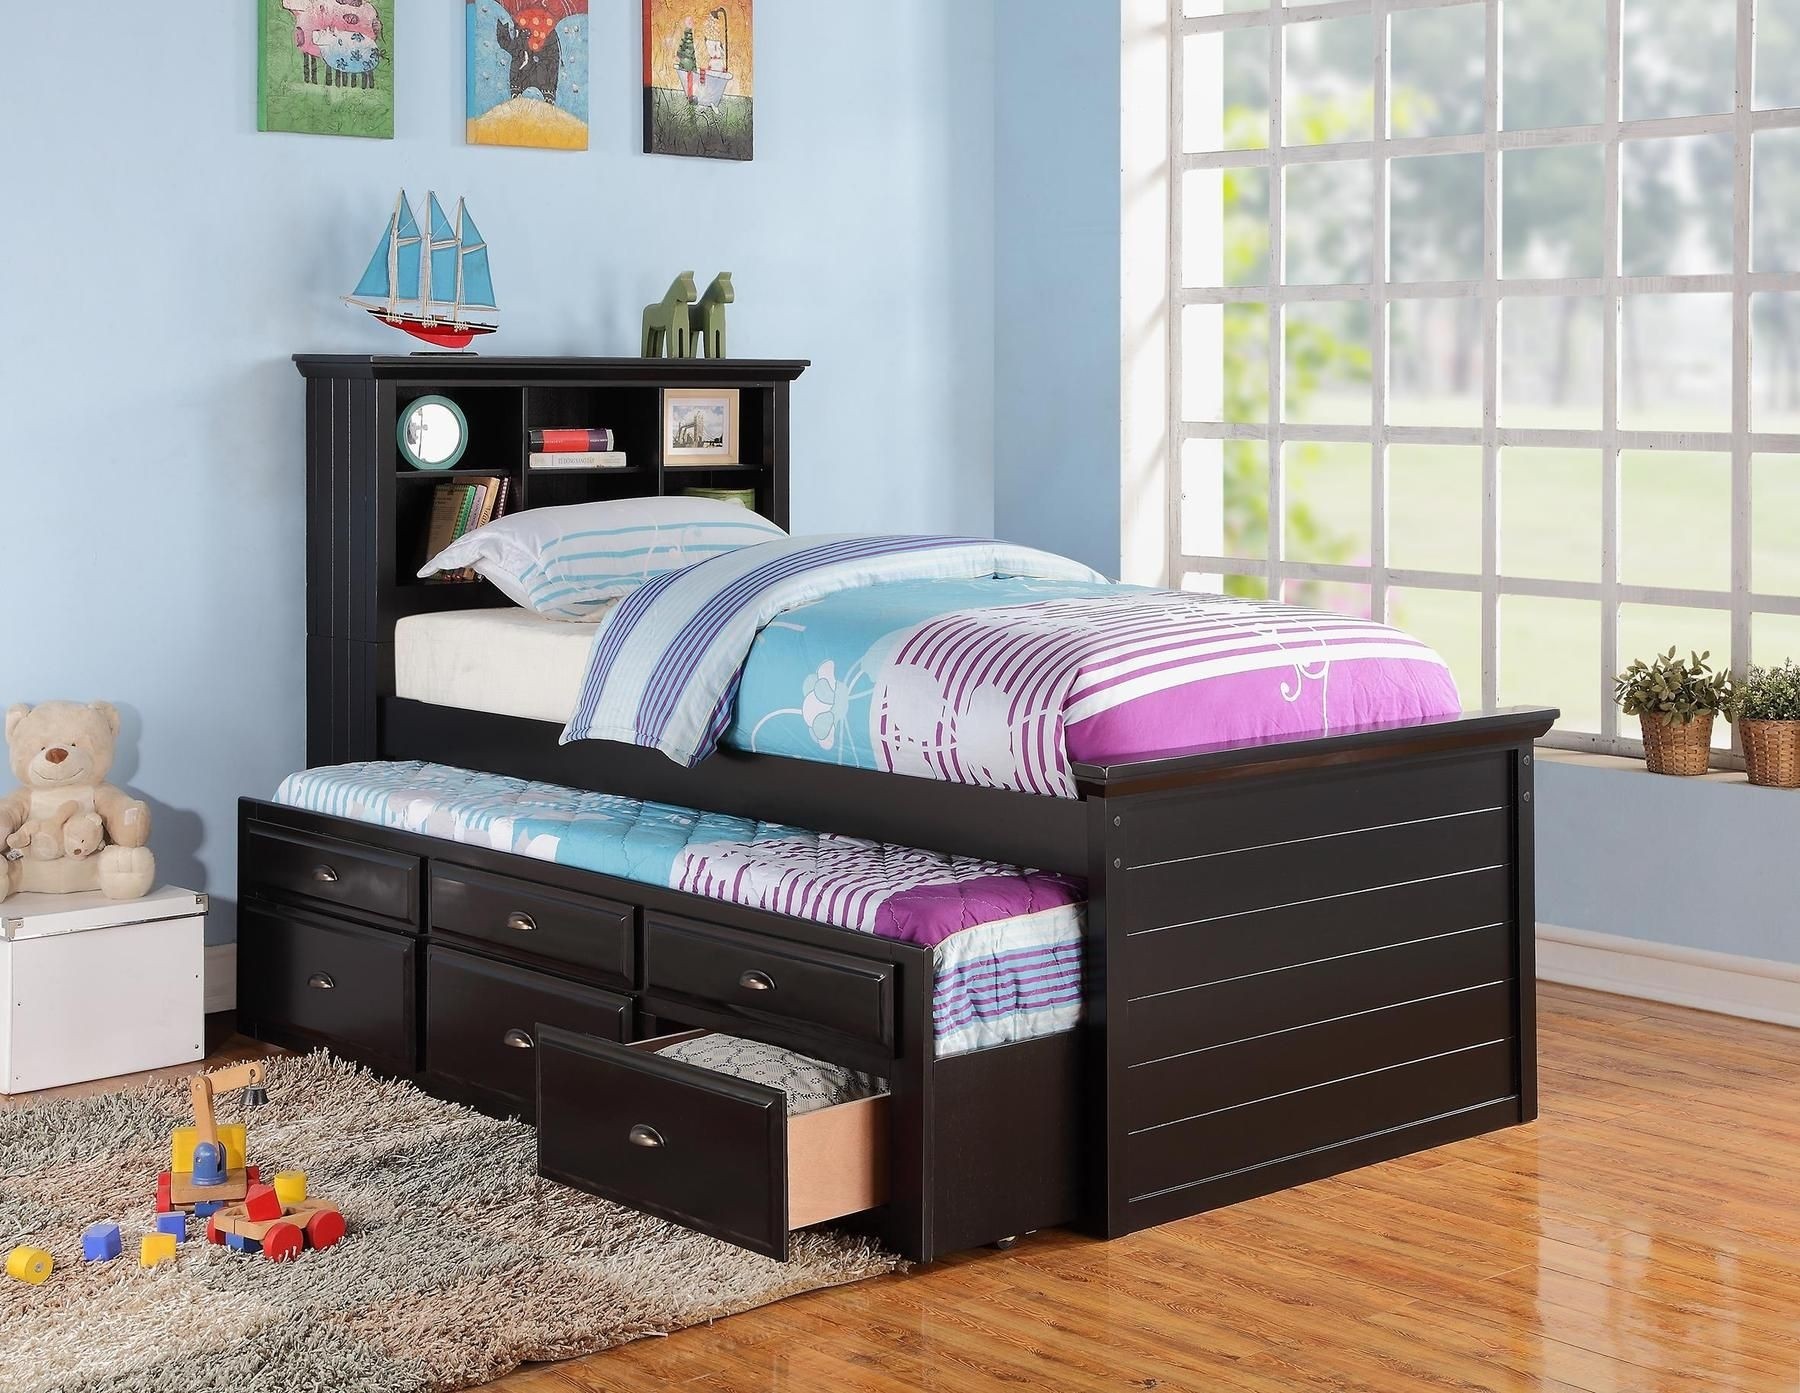 BLACK CAPTAIN TWIN BOOKCASE BED W/TRUNDLE BED AND 3 DRAWERS STORAGE